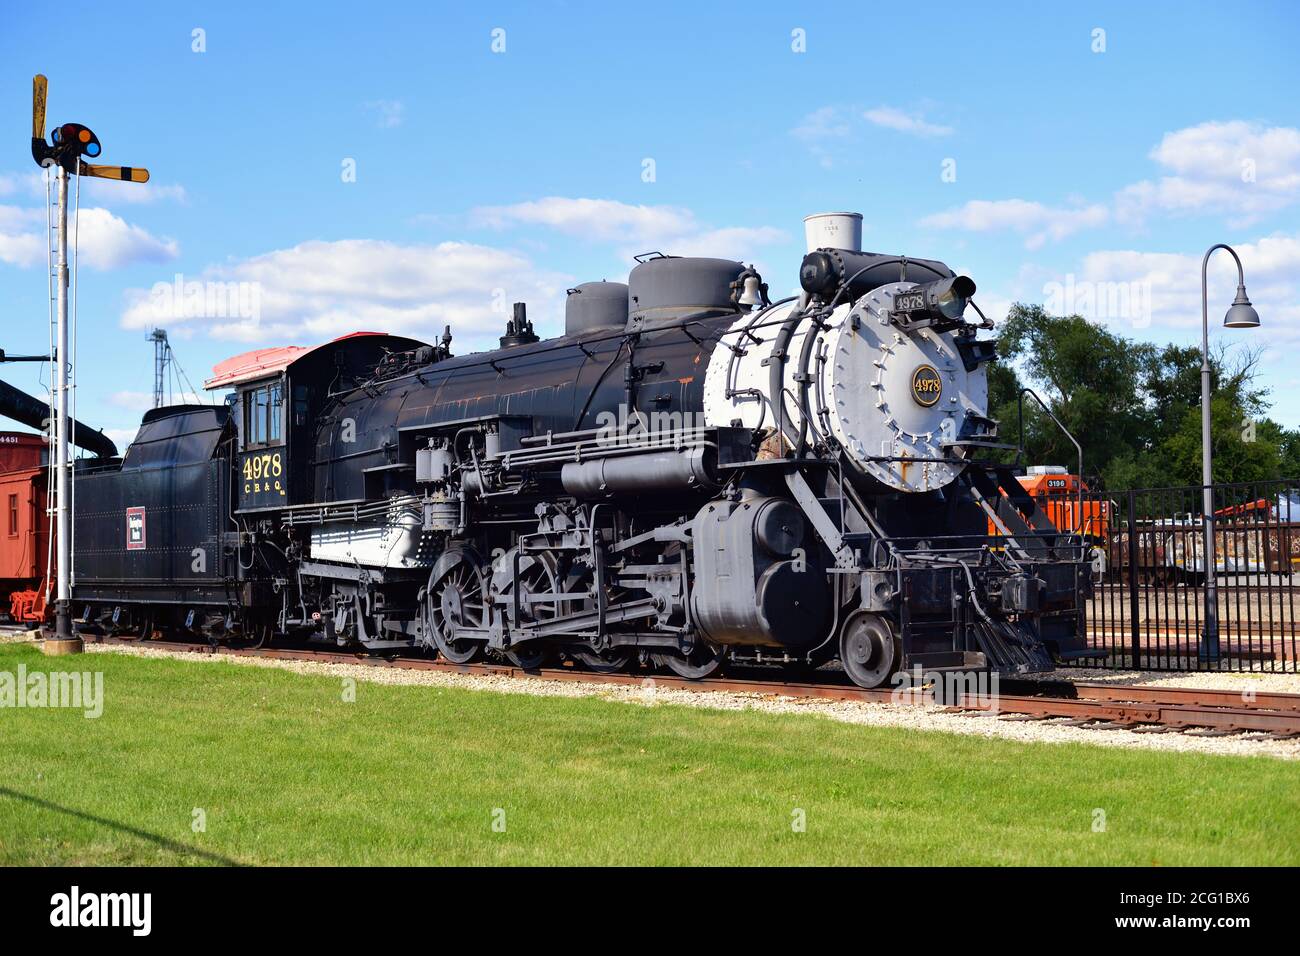 Mendota, Illinois, USA. An old steam locomotive, 2-8-2 Mikado class engine, preserved on the grounds of the Union Depot Railroad Museum. Stock Photo